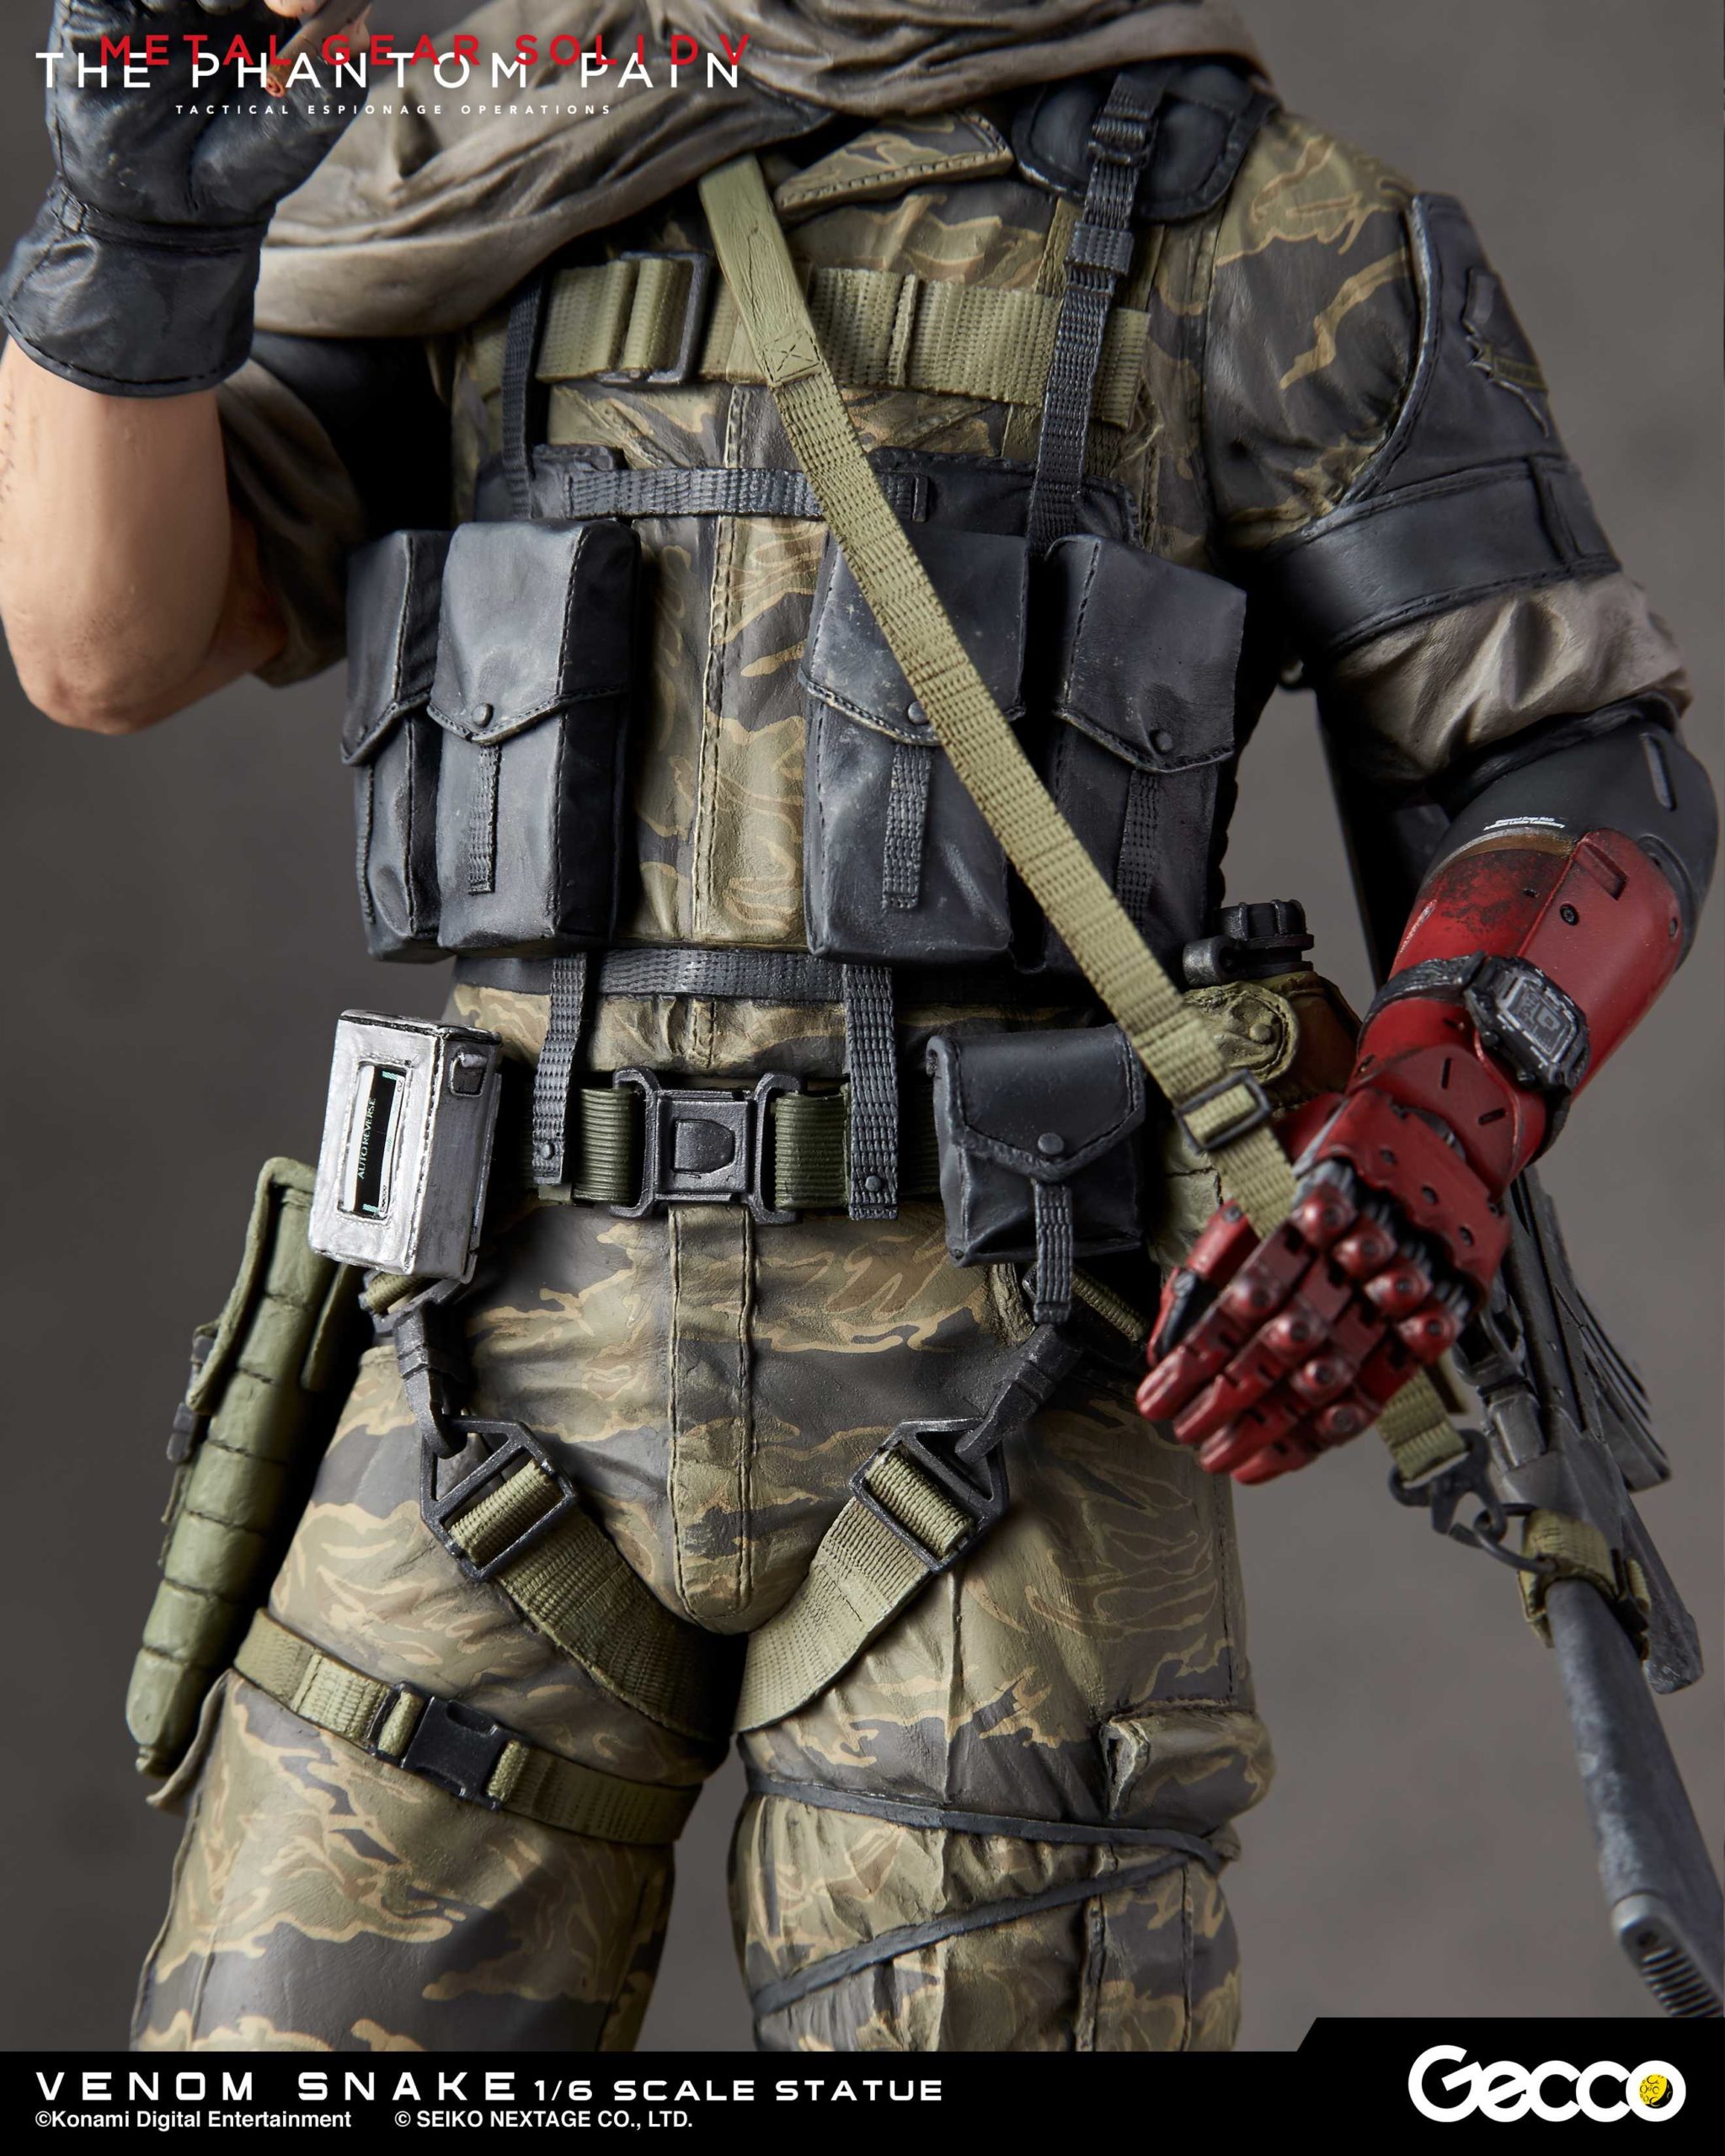 $300 Statue Of Metal Gear Solid V’s Venom Snake Includes Cute Puppy